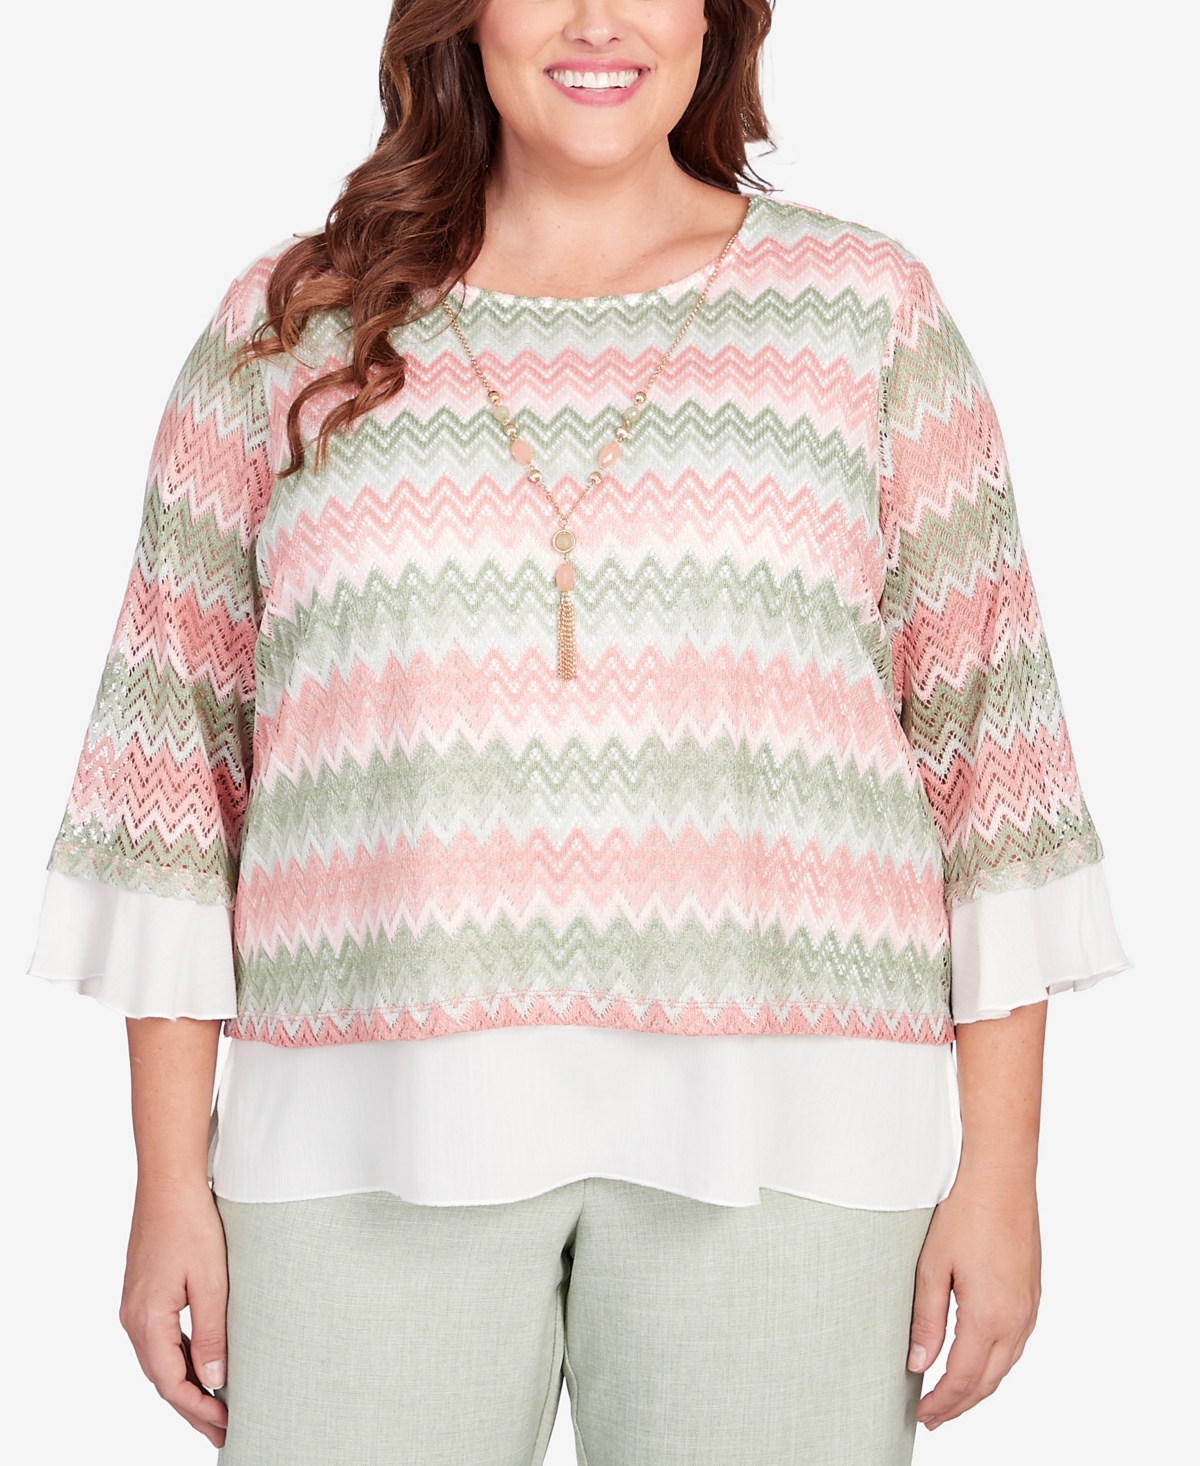 Plus Size English Garden Zig Zag Texture Top with Necklace - Multi